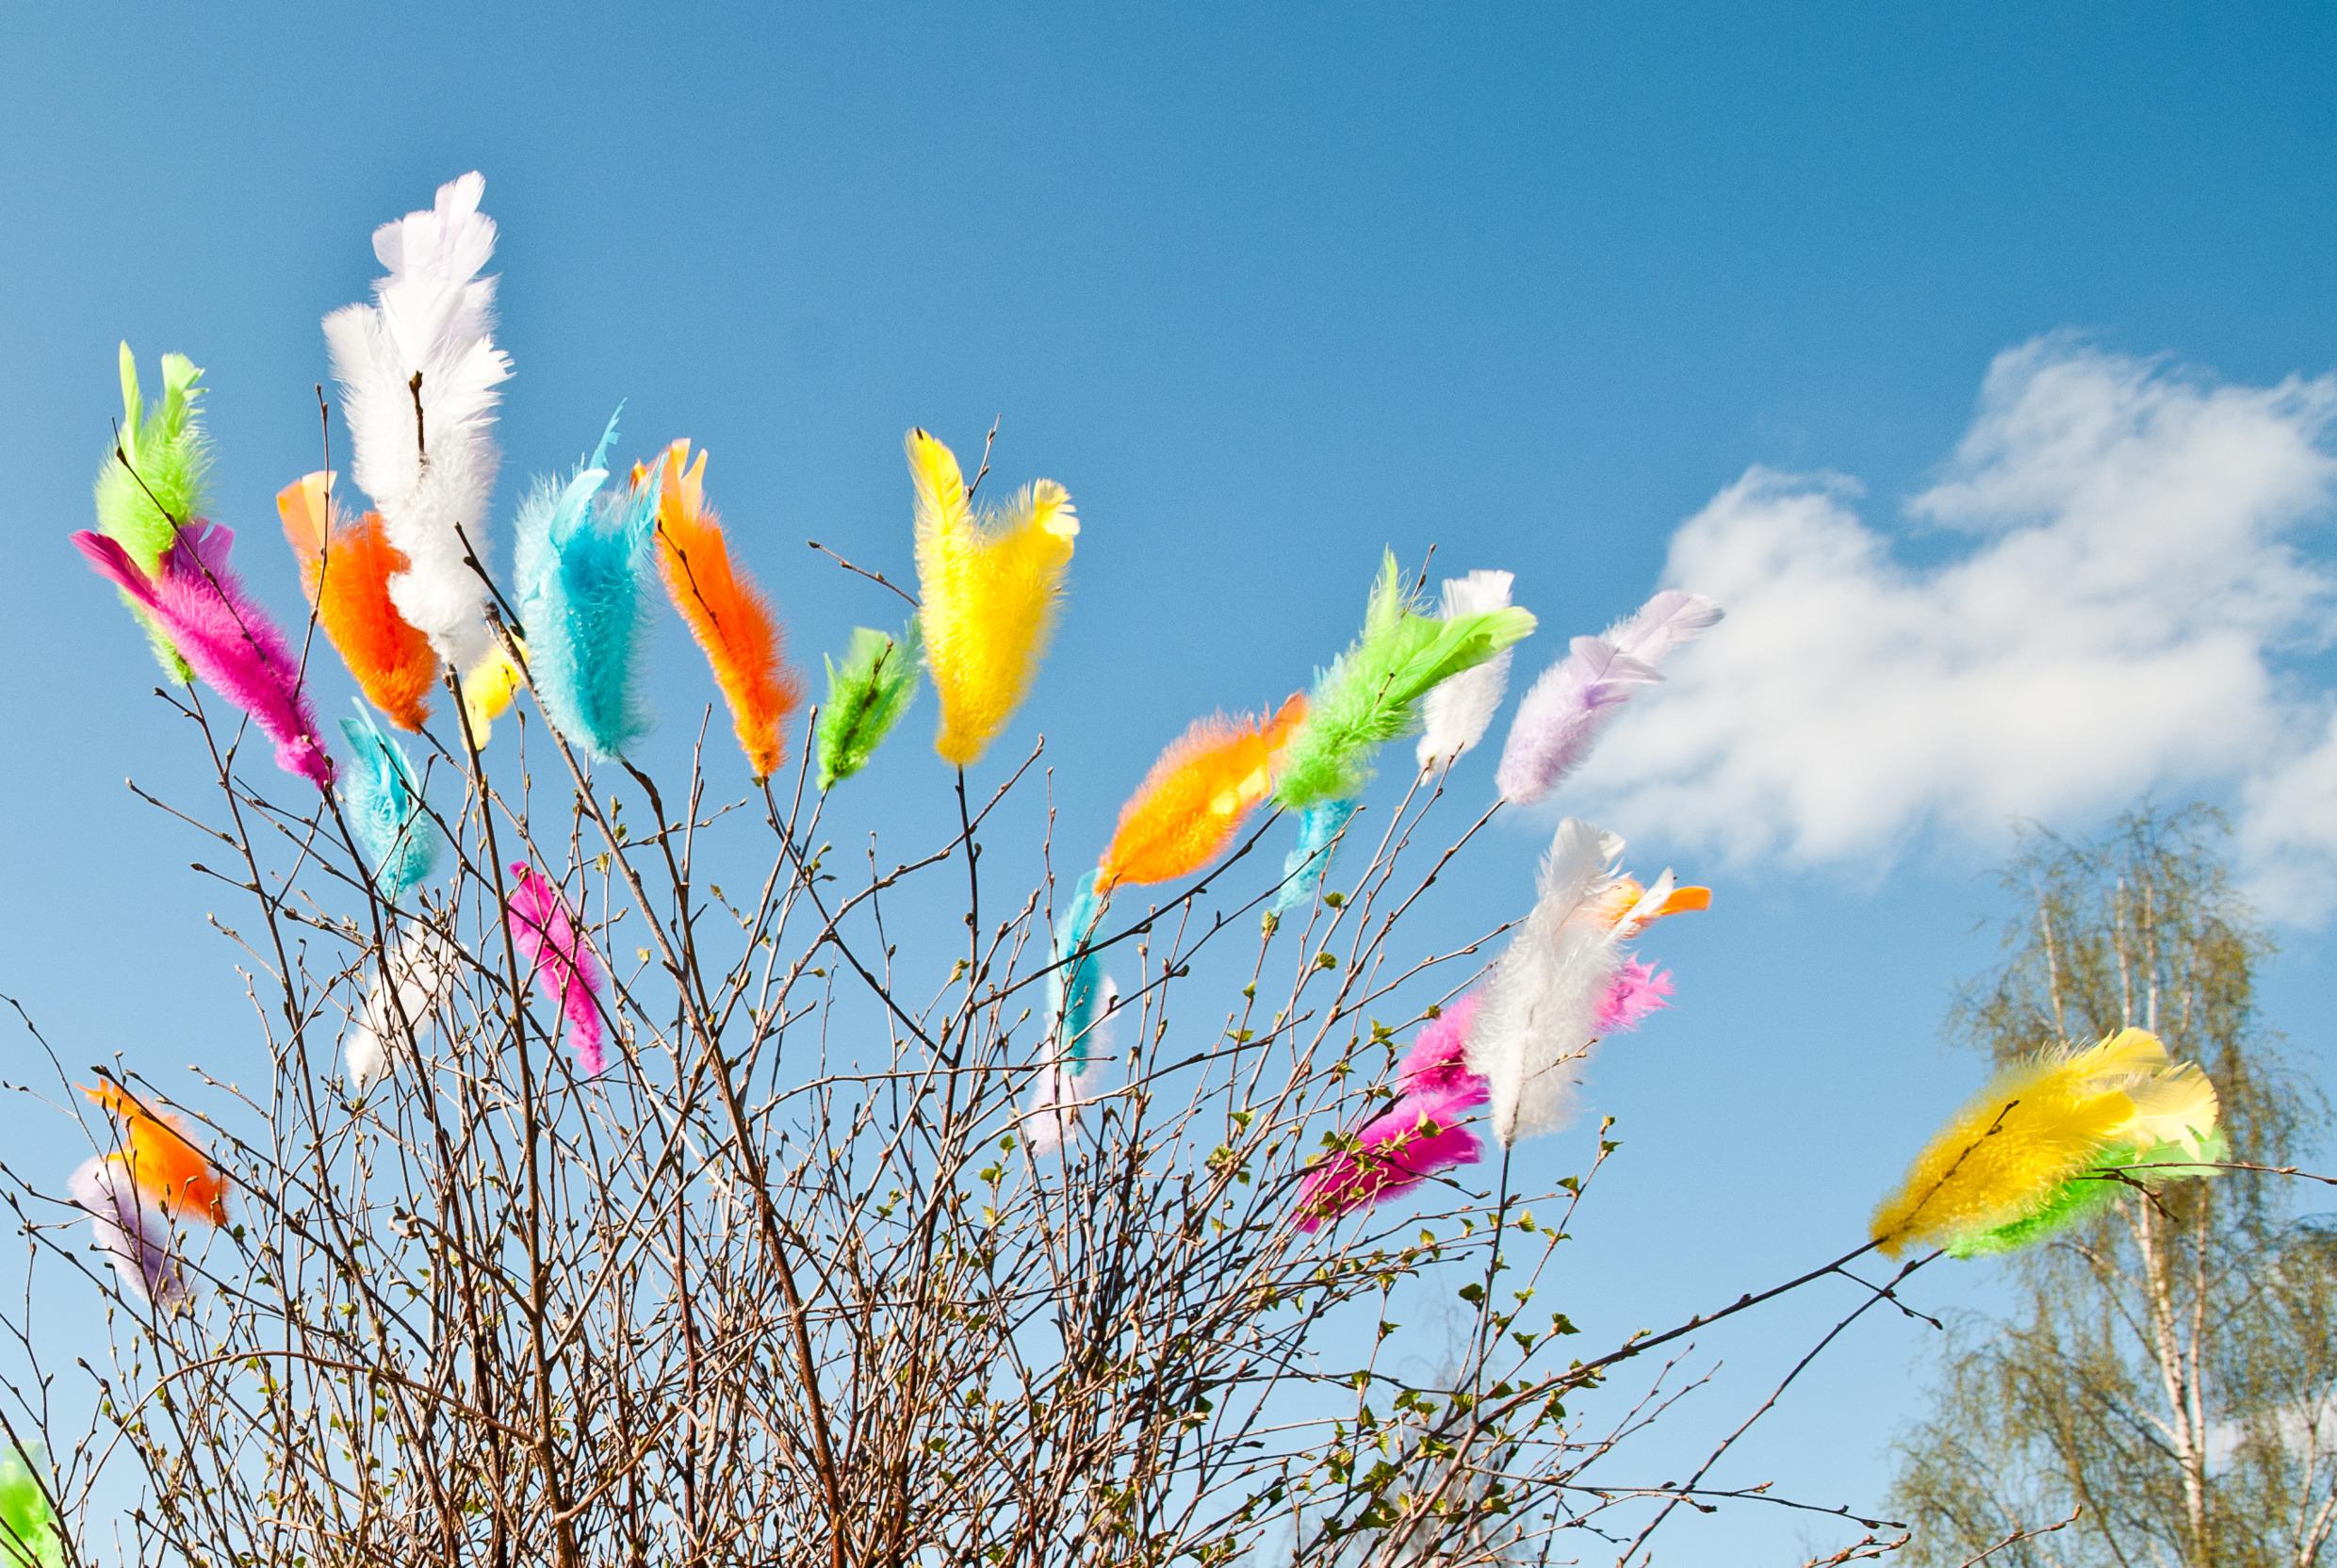 Twigs decorated with colourful feathers.